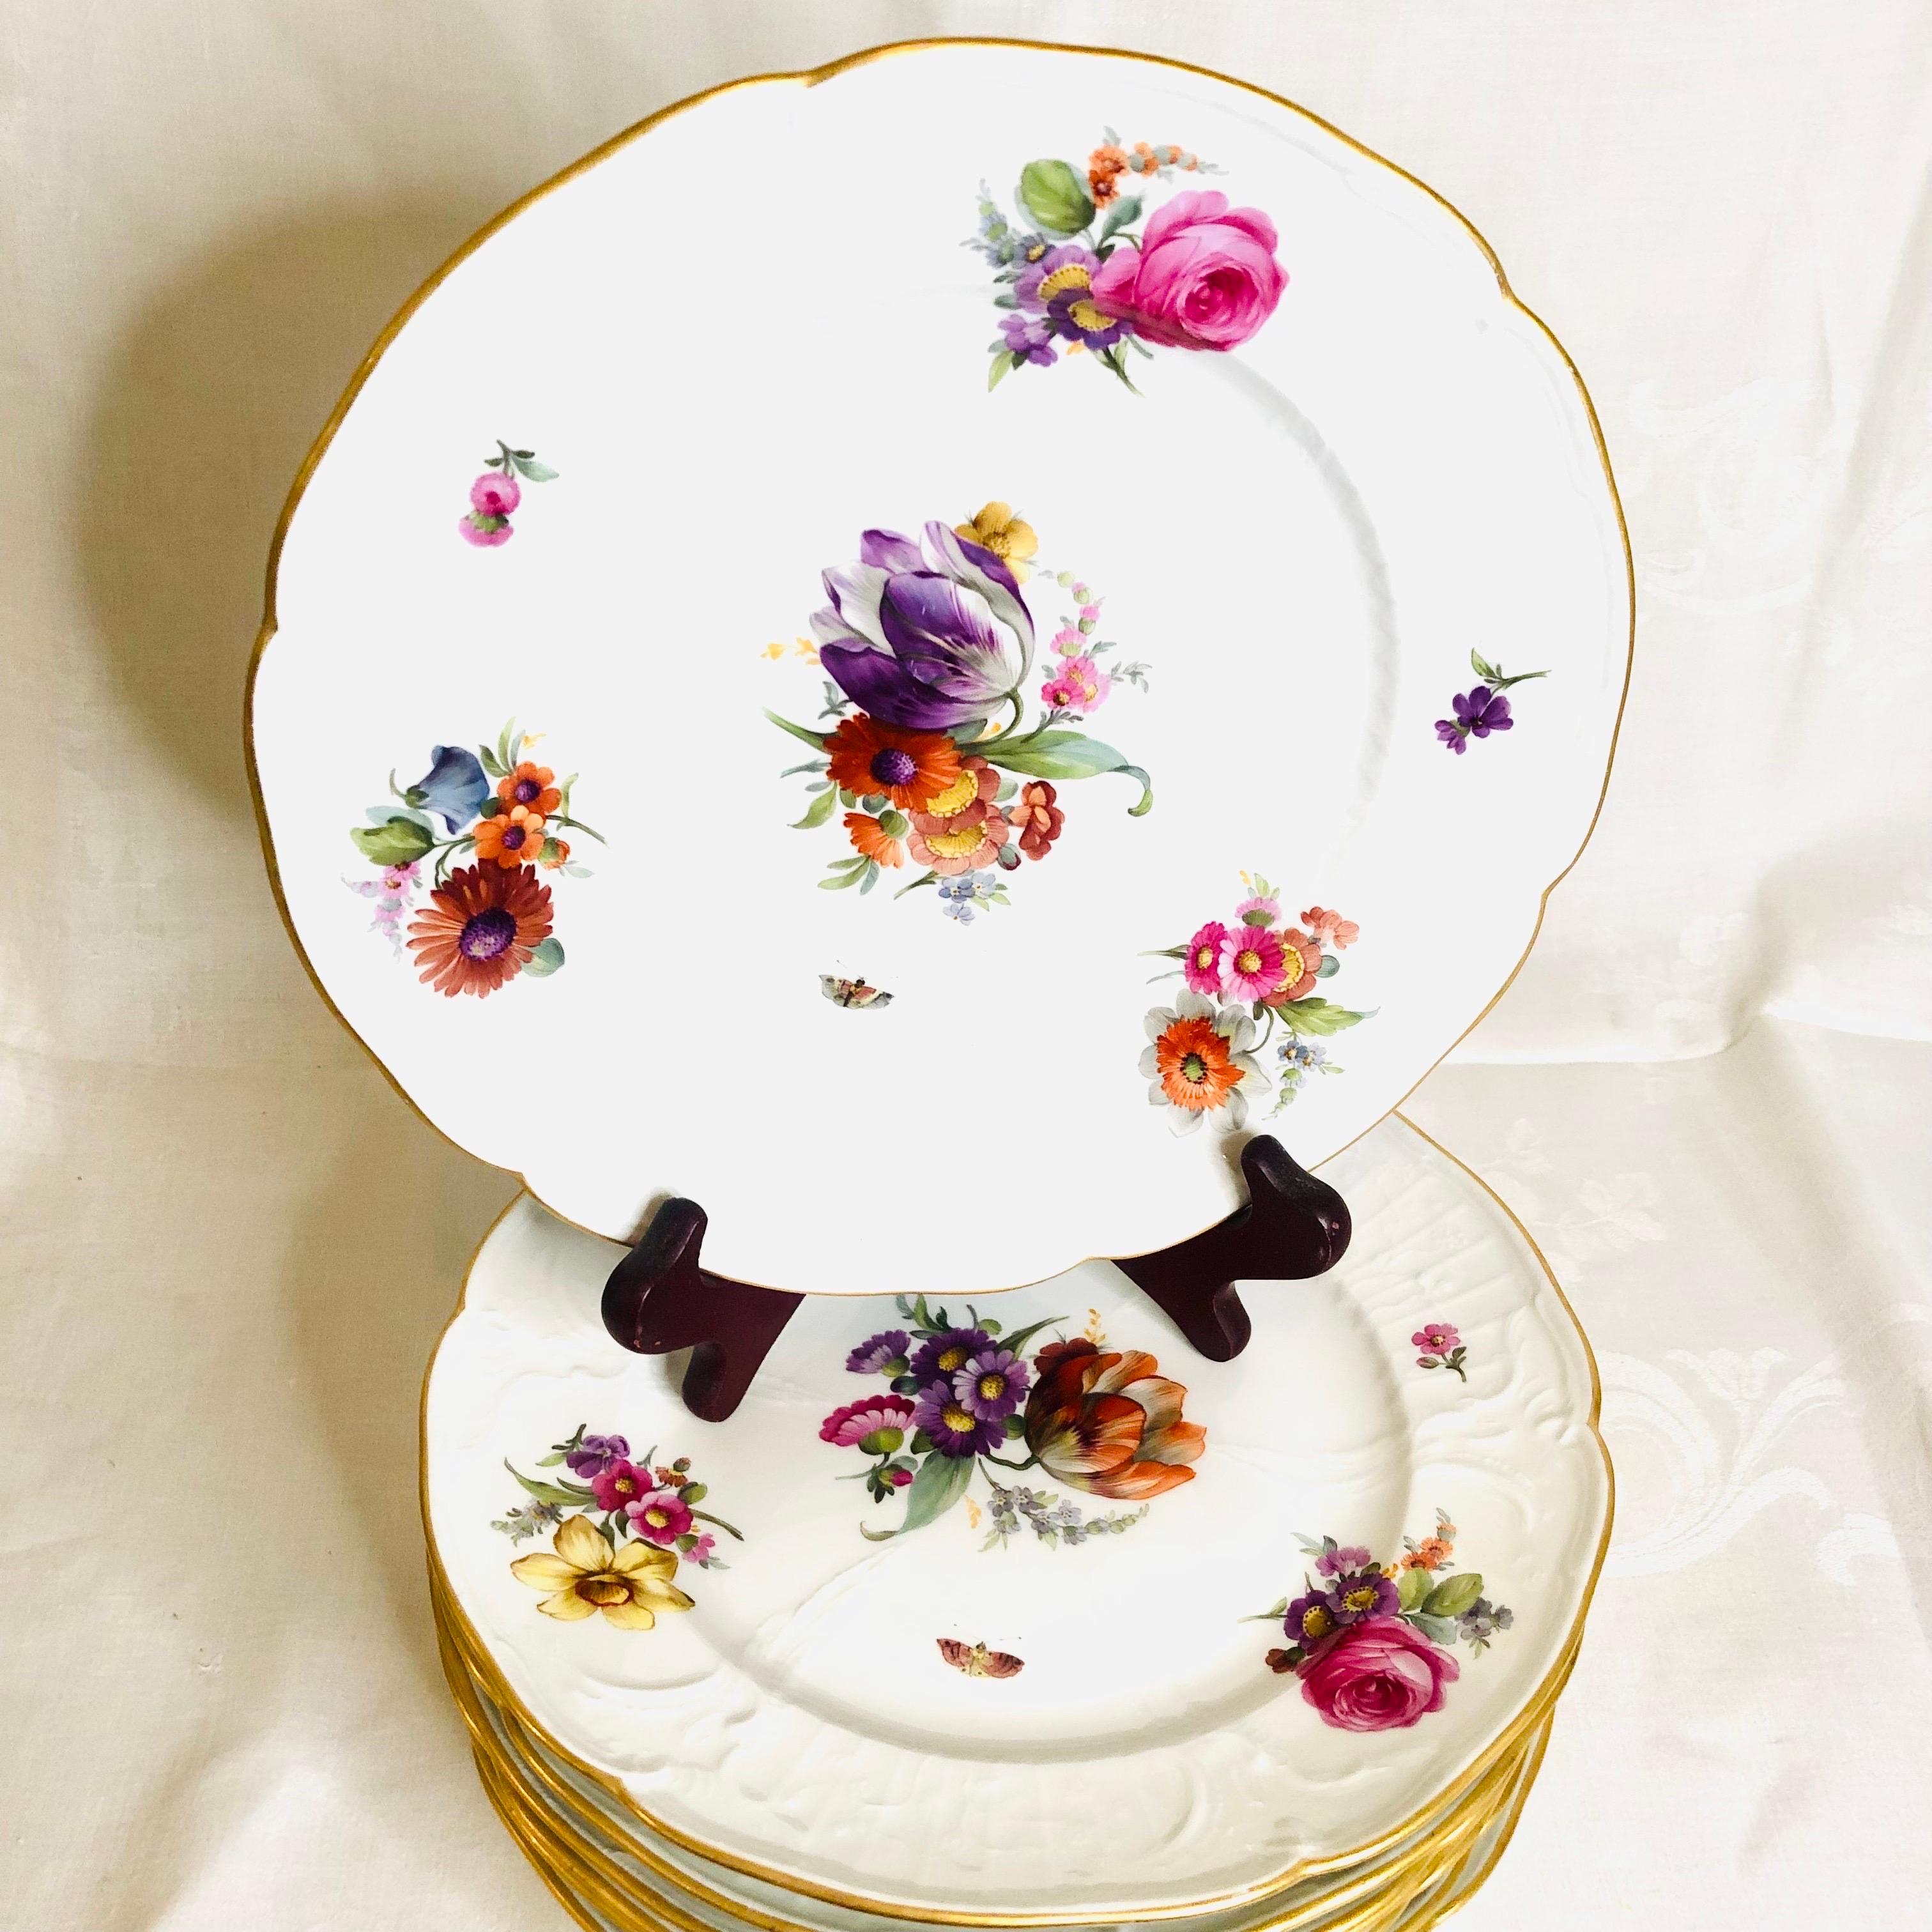 This is a gorgeous set of KPM luncheon or dessert plates. Each KPM plate has a different central bright colored bouquet of flowers. Each flower bouquet is masterfully painted by an extremely talented KPM artist. In addition to this beautiful central